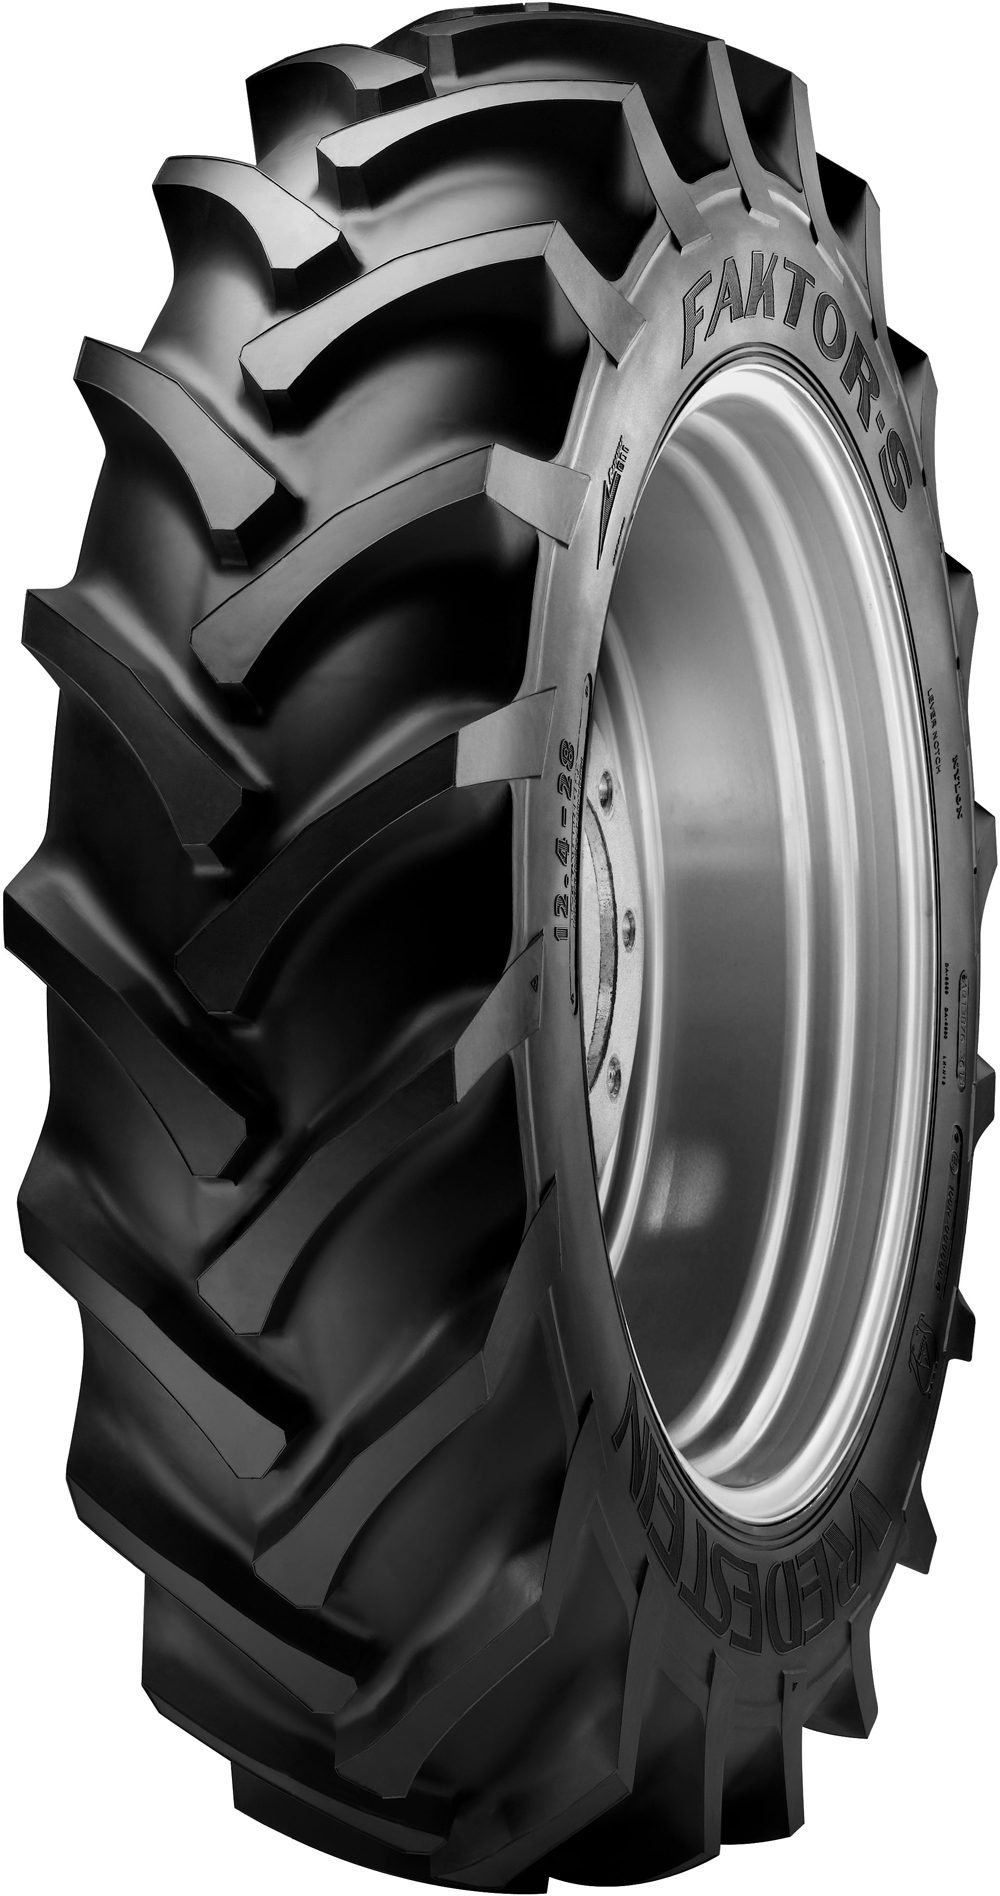 product_type-industrial_tires VREDESTEIN Faktor-S 8 TT 16.9 R30 137A8